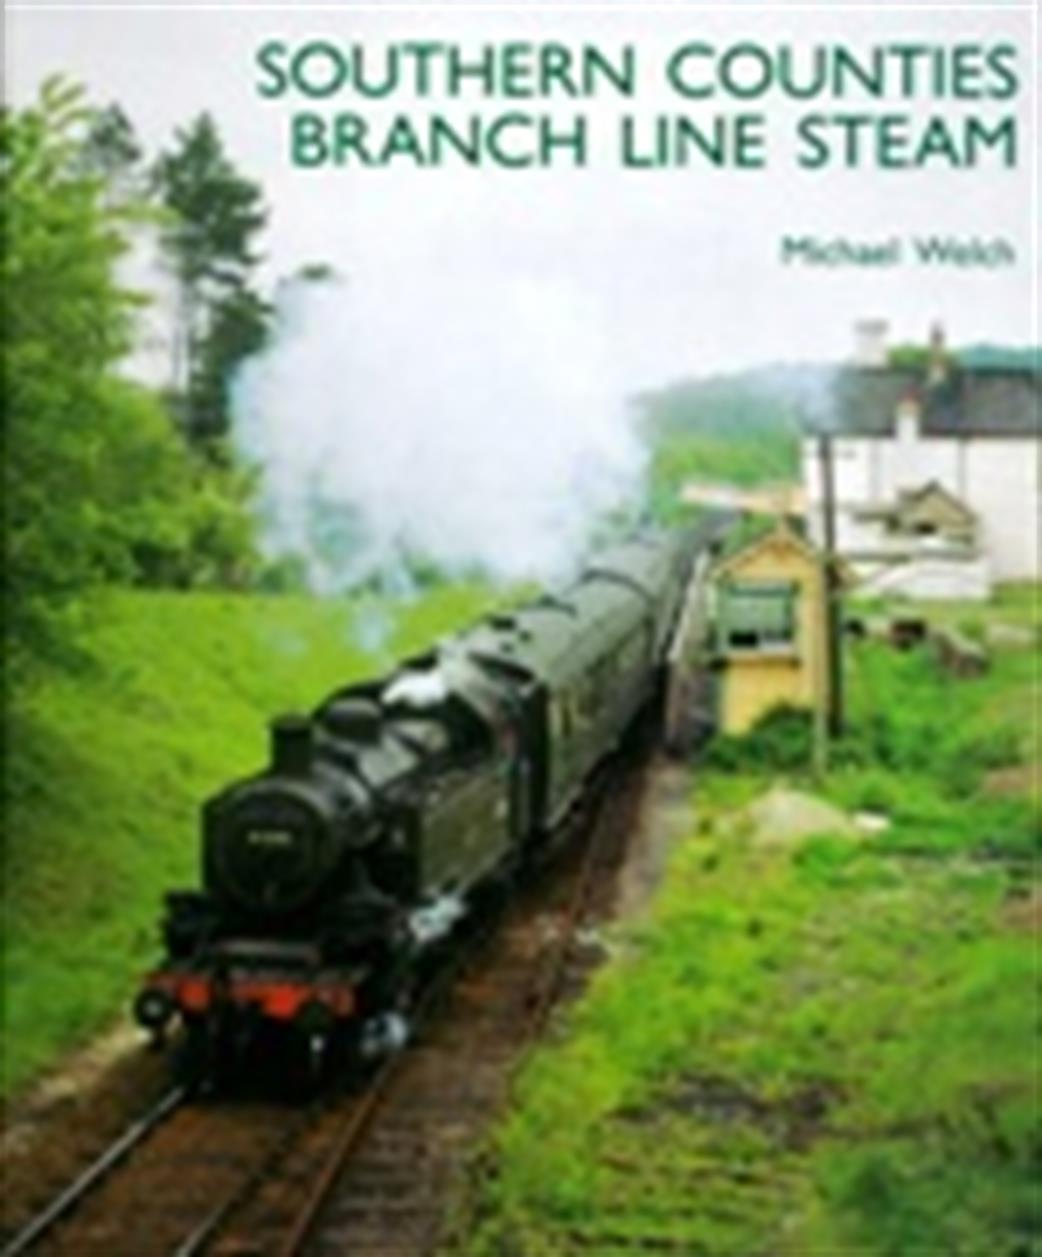 Capital Transport Publishing  9781854143594 Southern Counties Branch Line Steam by Michael Welch